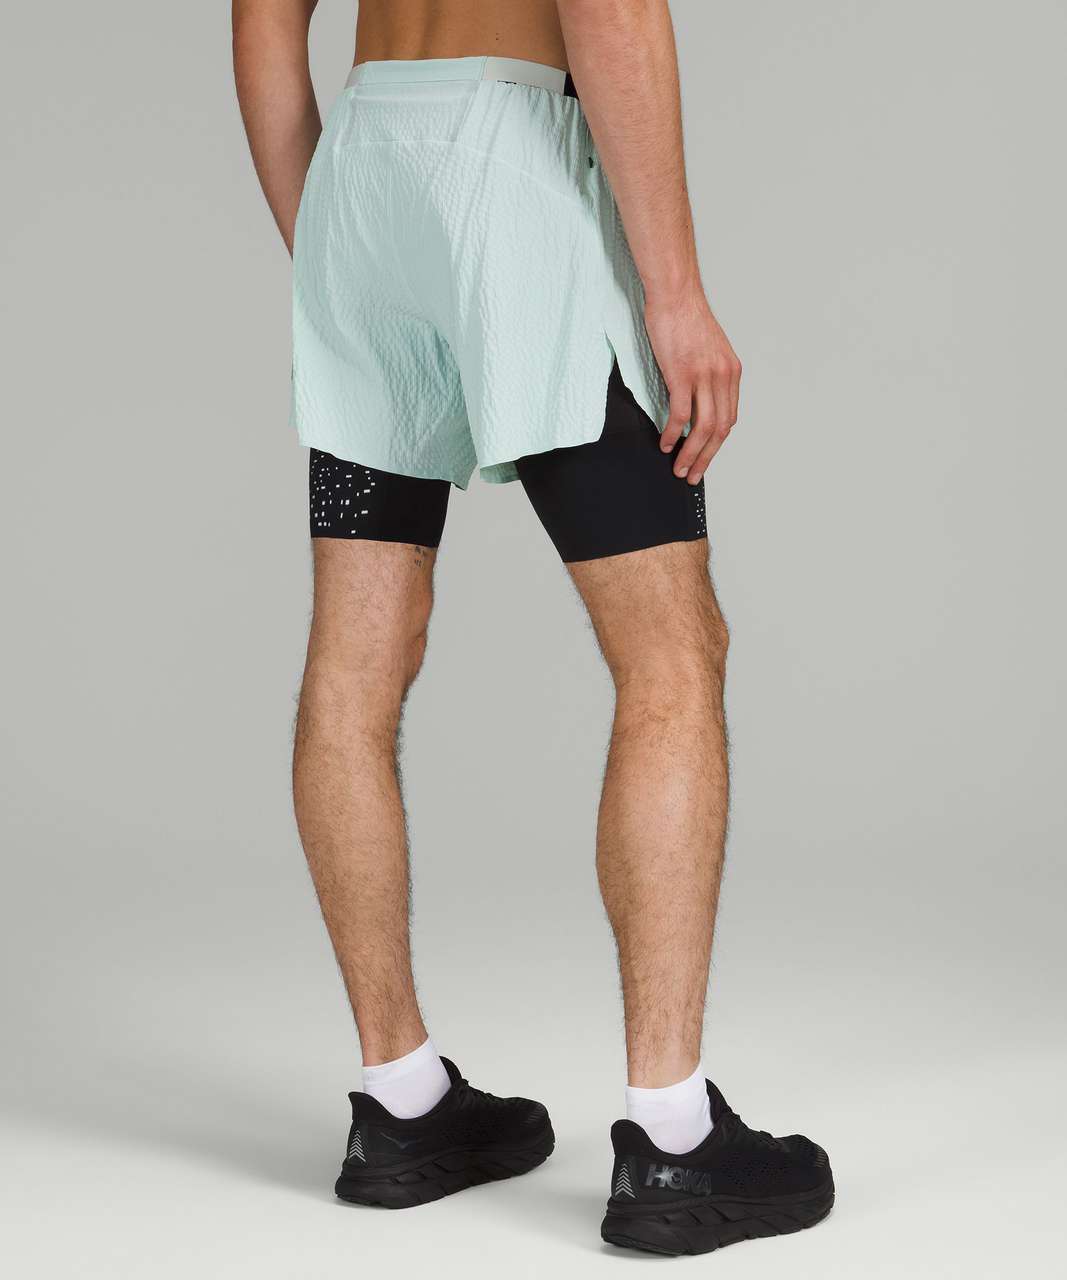 Lululemon Surge Lined Short 6" *Special Edition - Delicate Mint / Inflect Textured Raw Linen Multi